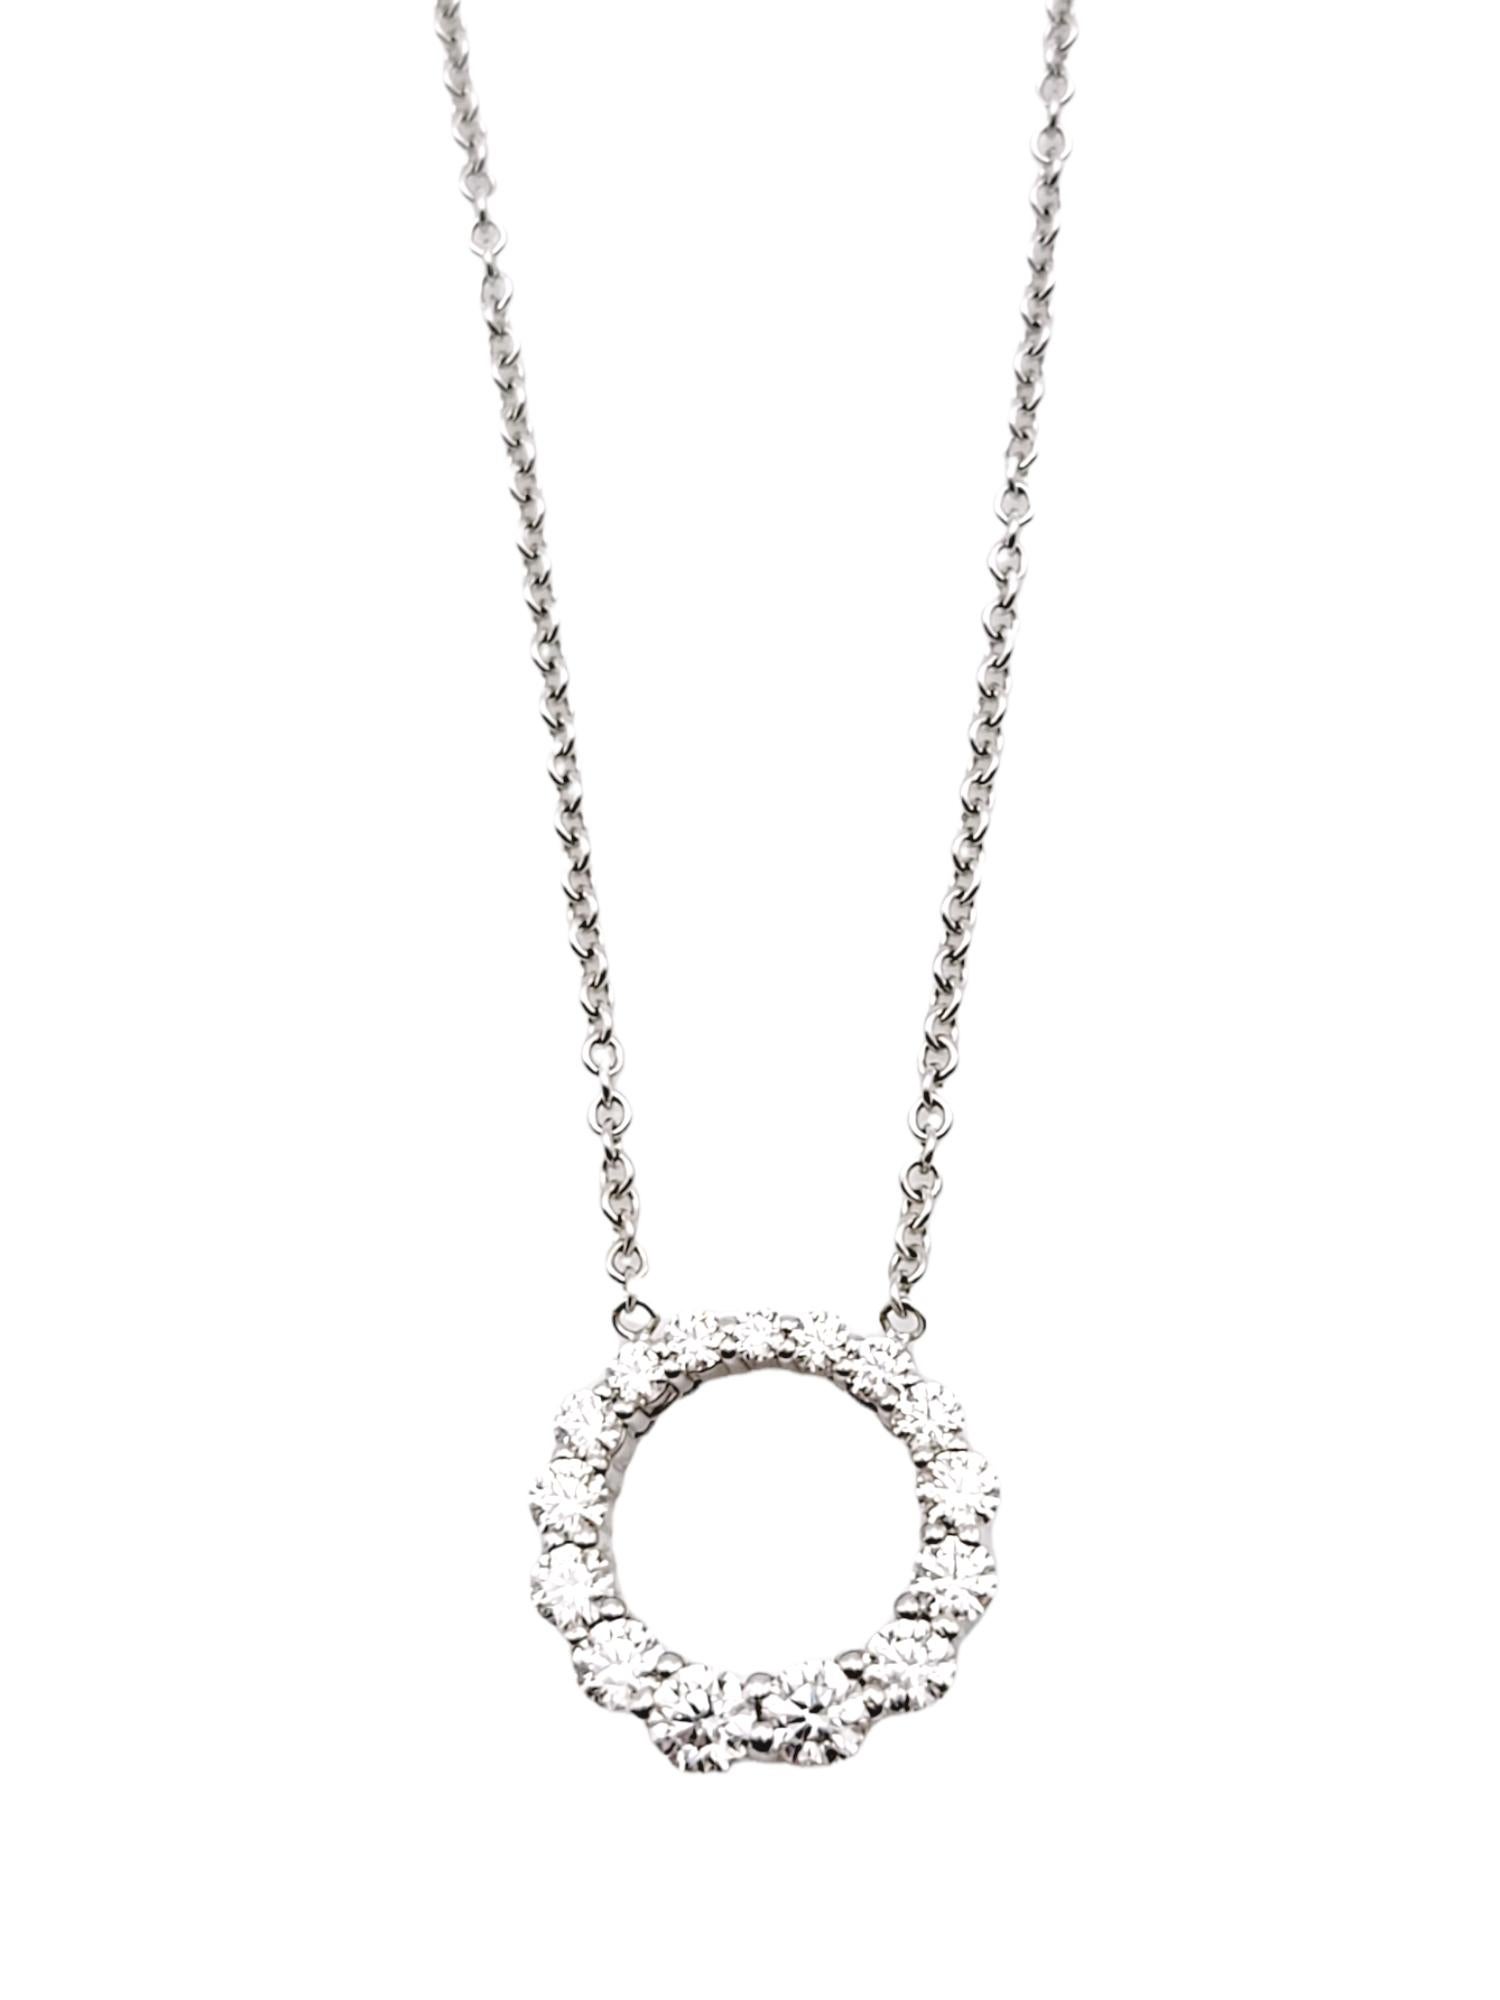 This sparkling diamond pendant necklace is stunningly simple, yet undeniably beautiful. The delicate chain and icy circle of graduated natural round diamonds goes with just about everything. The luxurious 18 karat white gold setting further enhances